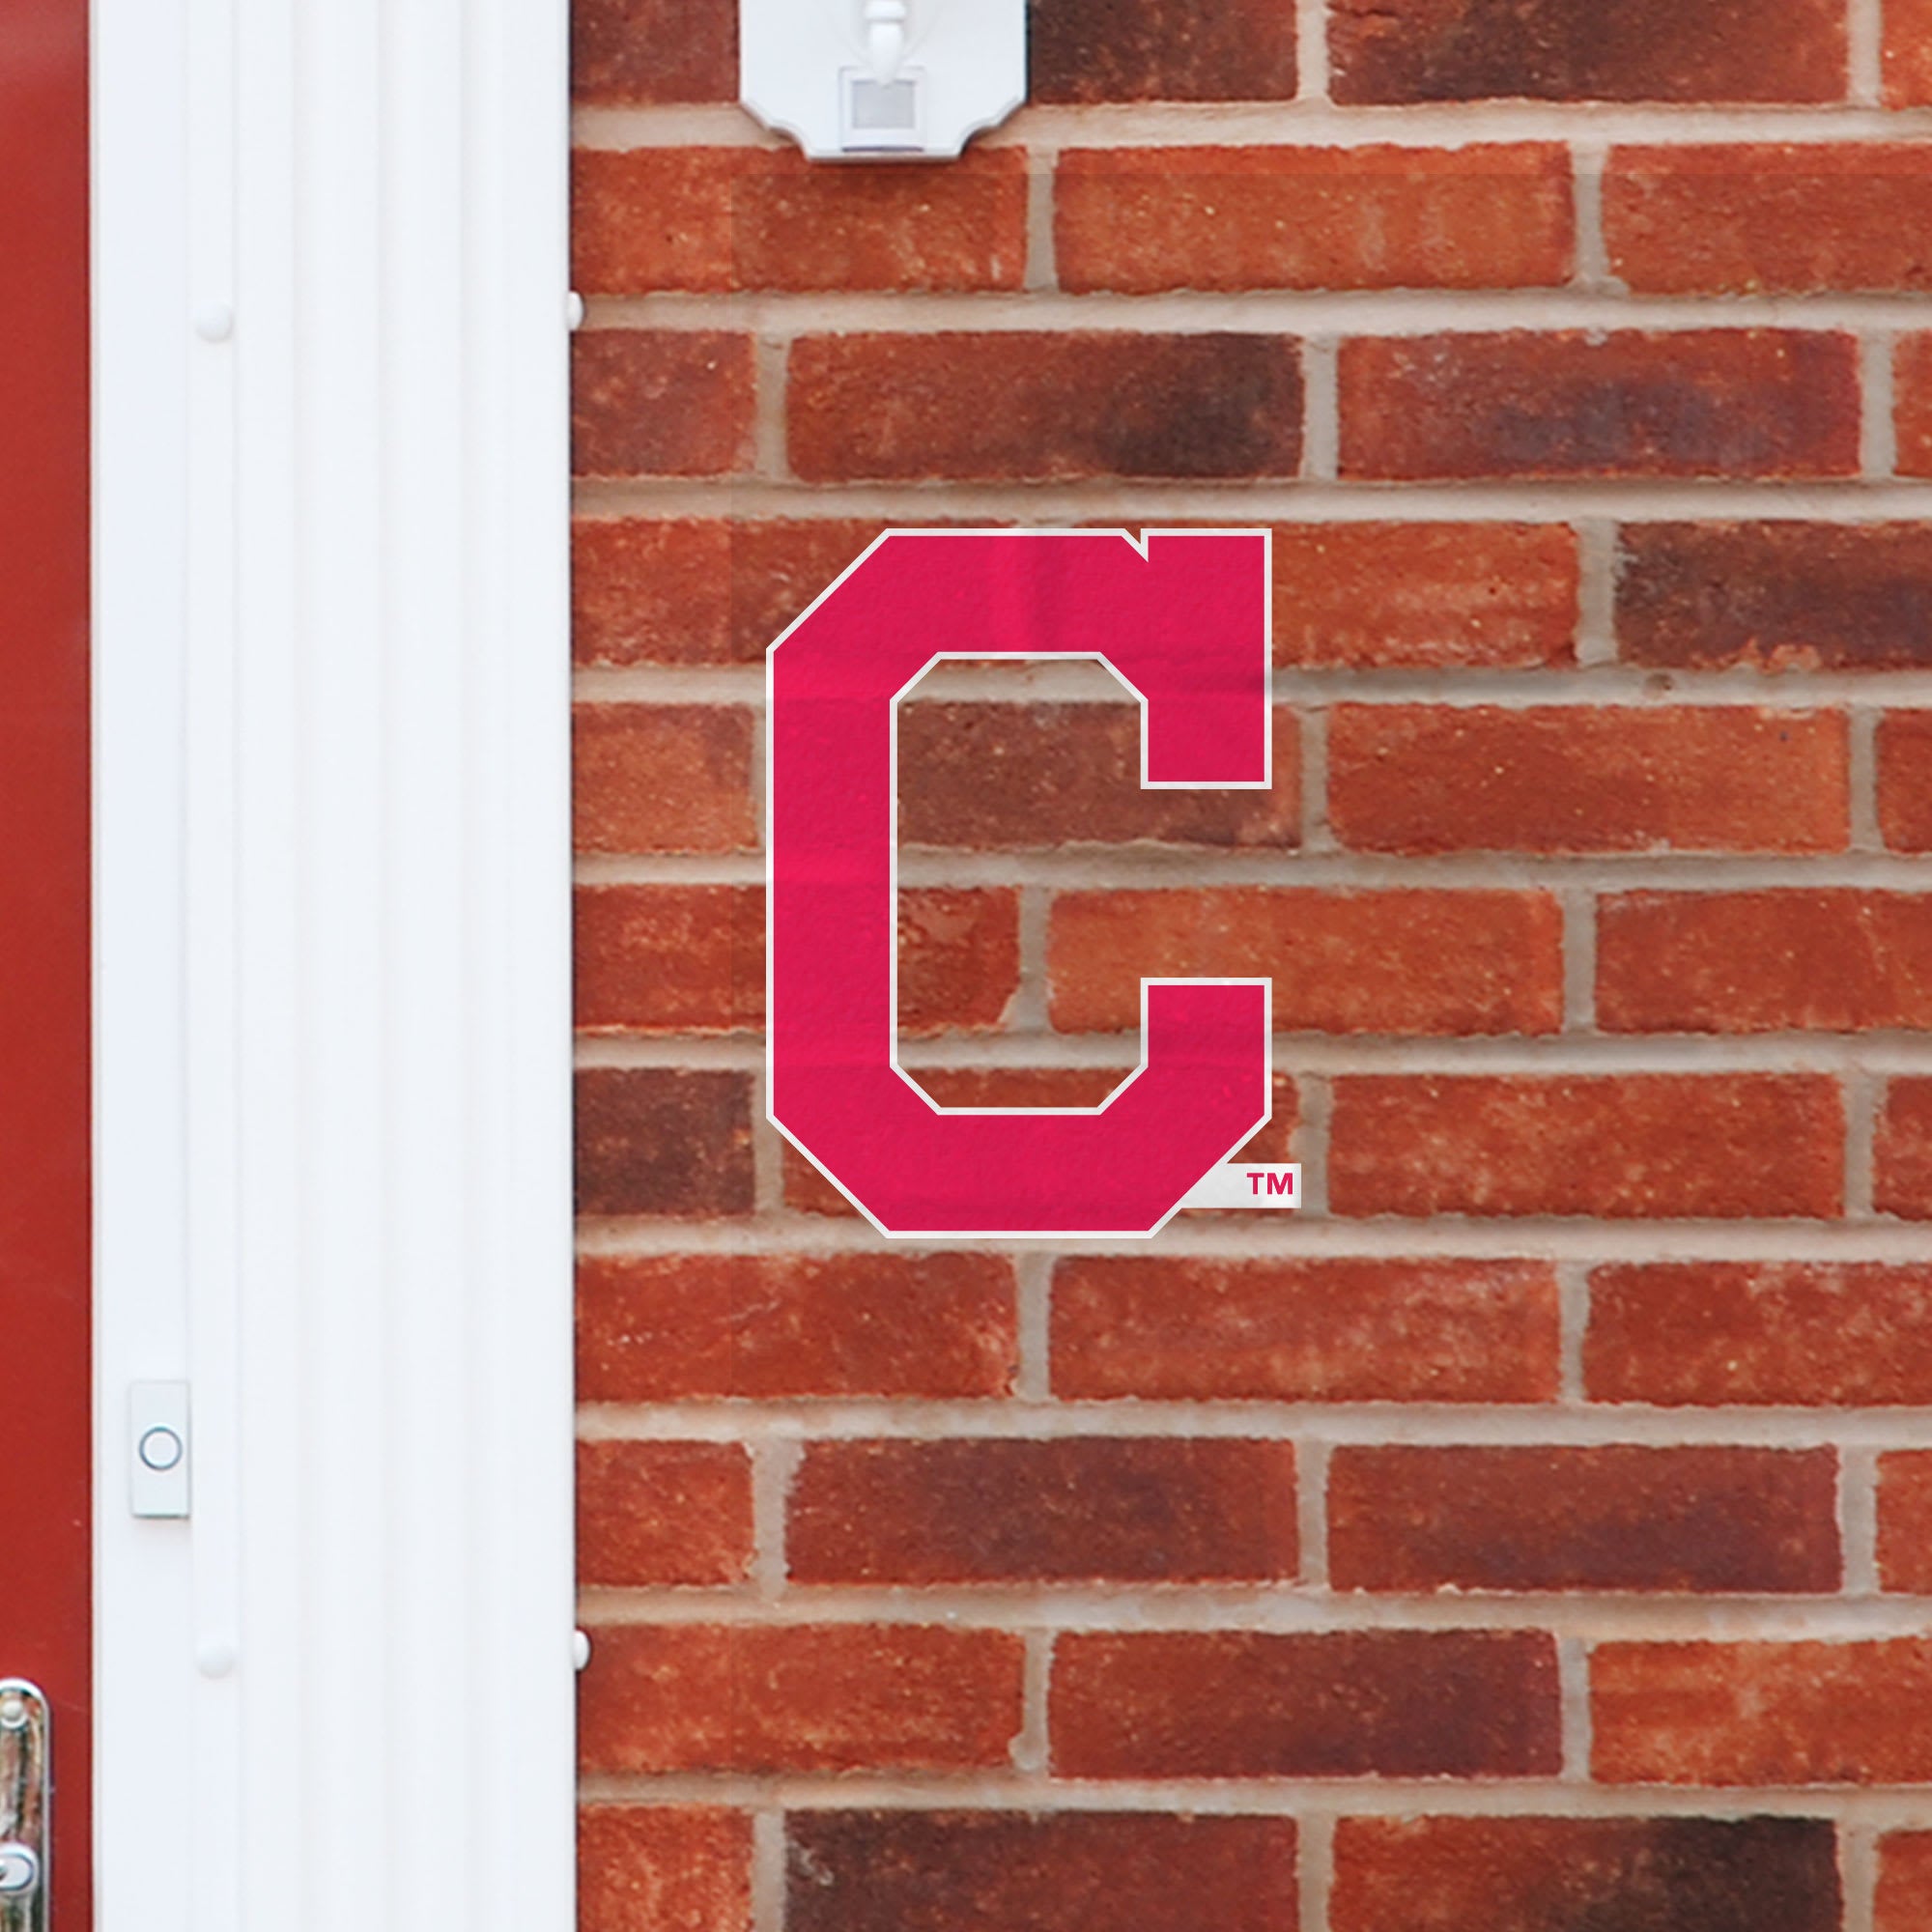 Cleveland Indians: Logo - Officially Licensed MLB Outdoor Graphic Large by Fathead | Wood/Aluminum